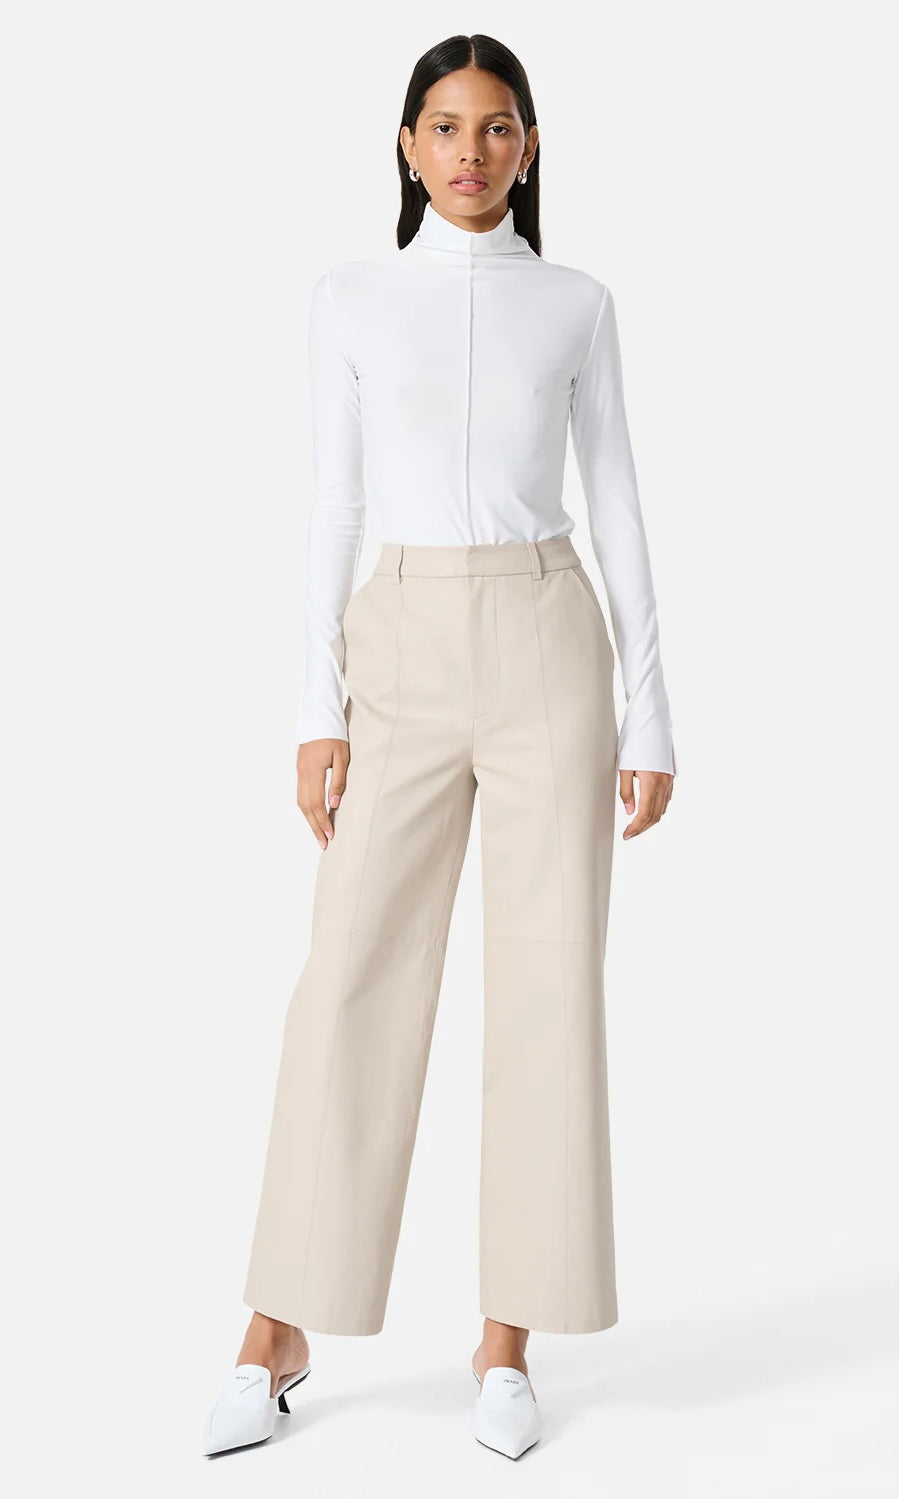 Ena Pelly Stanford Leather Pant In Turtledove